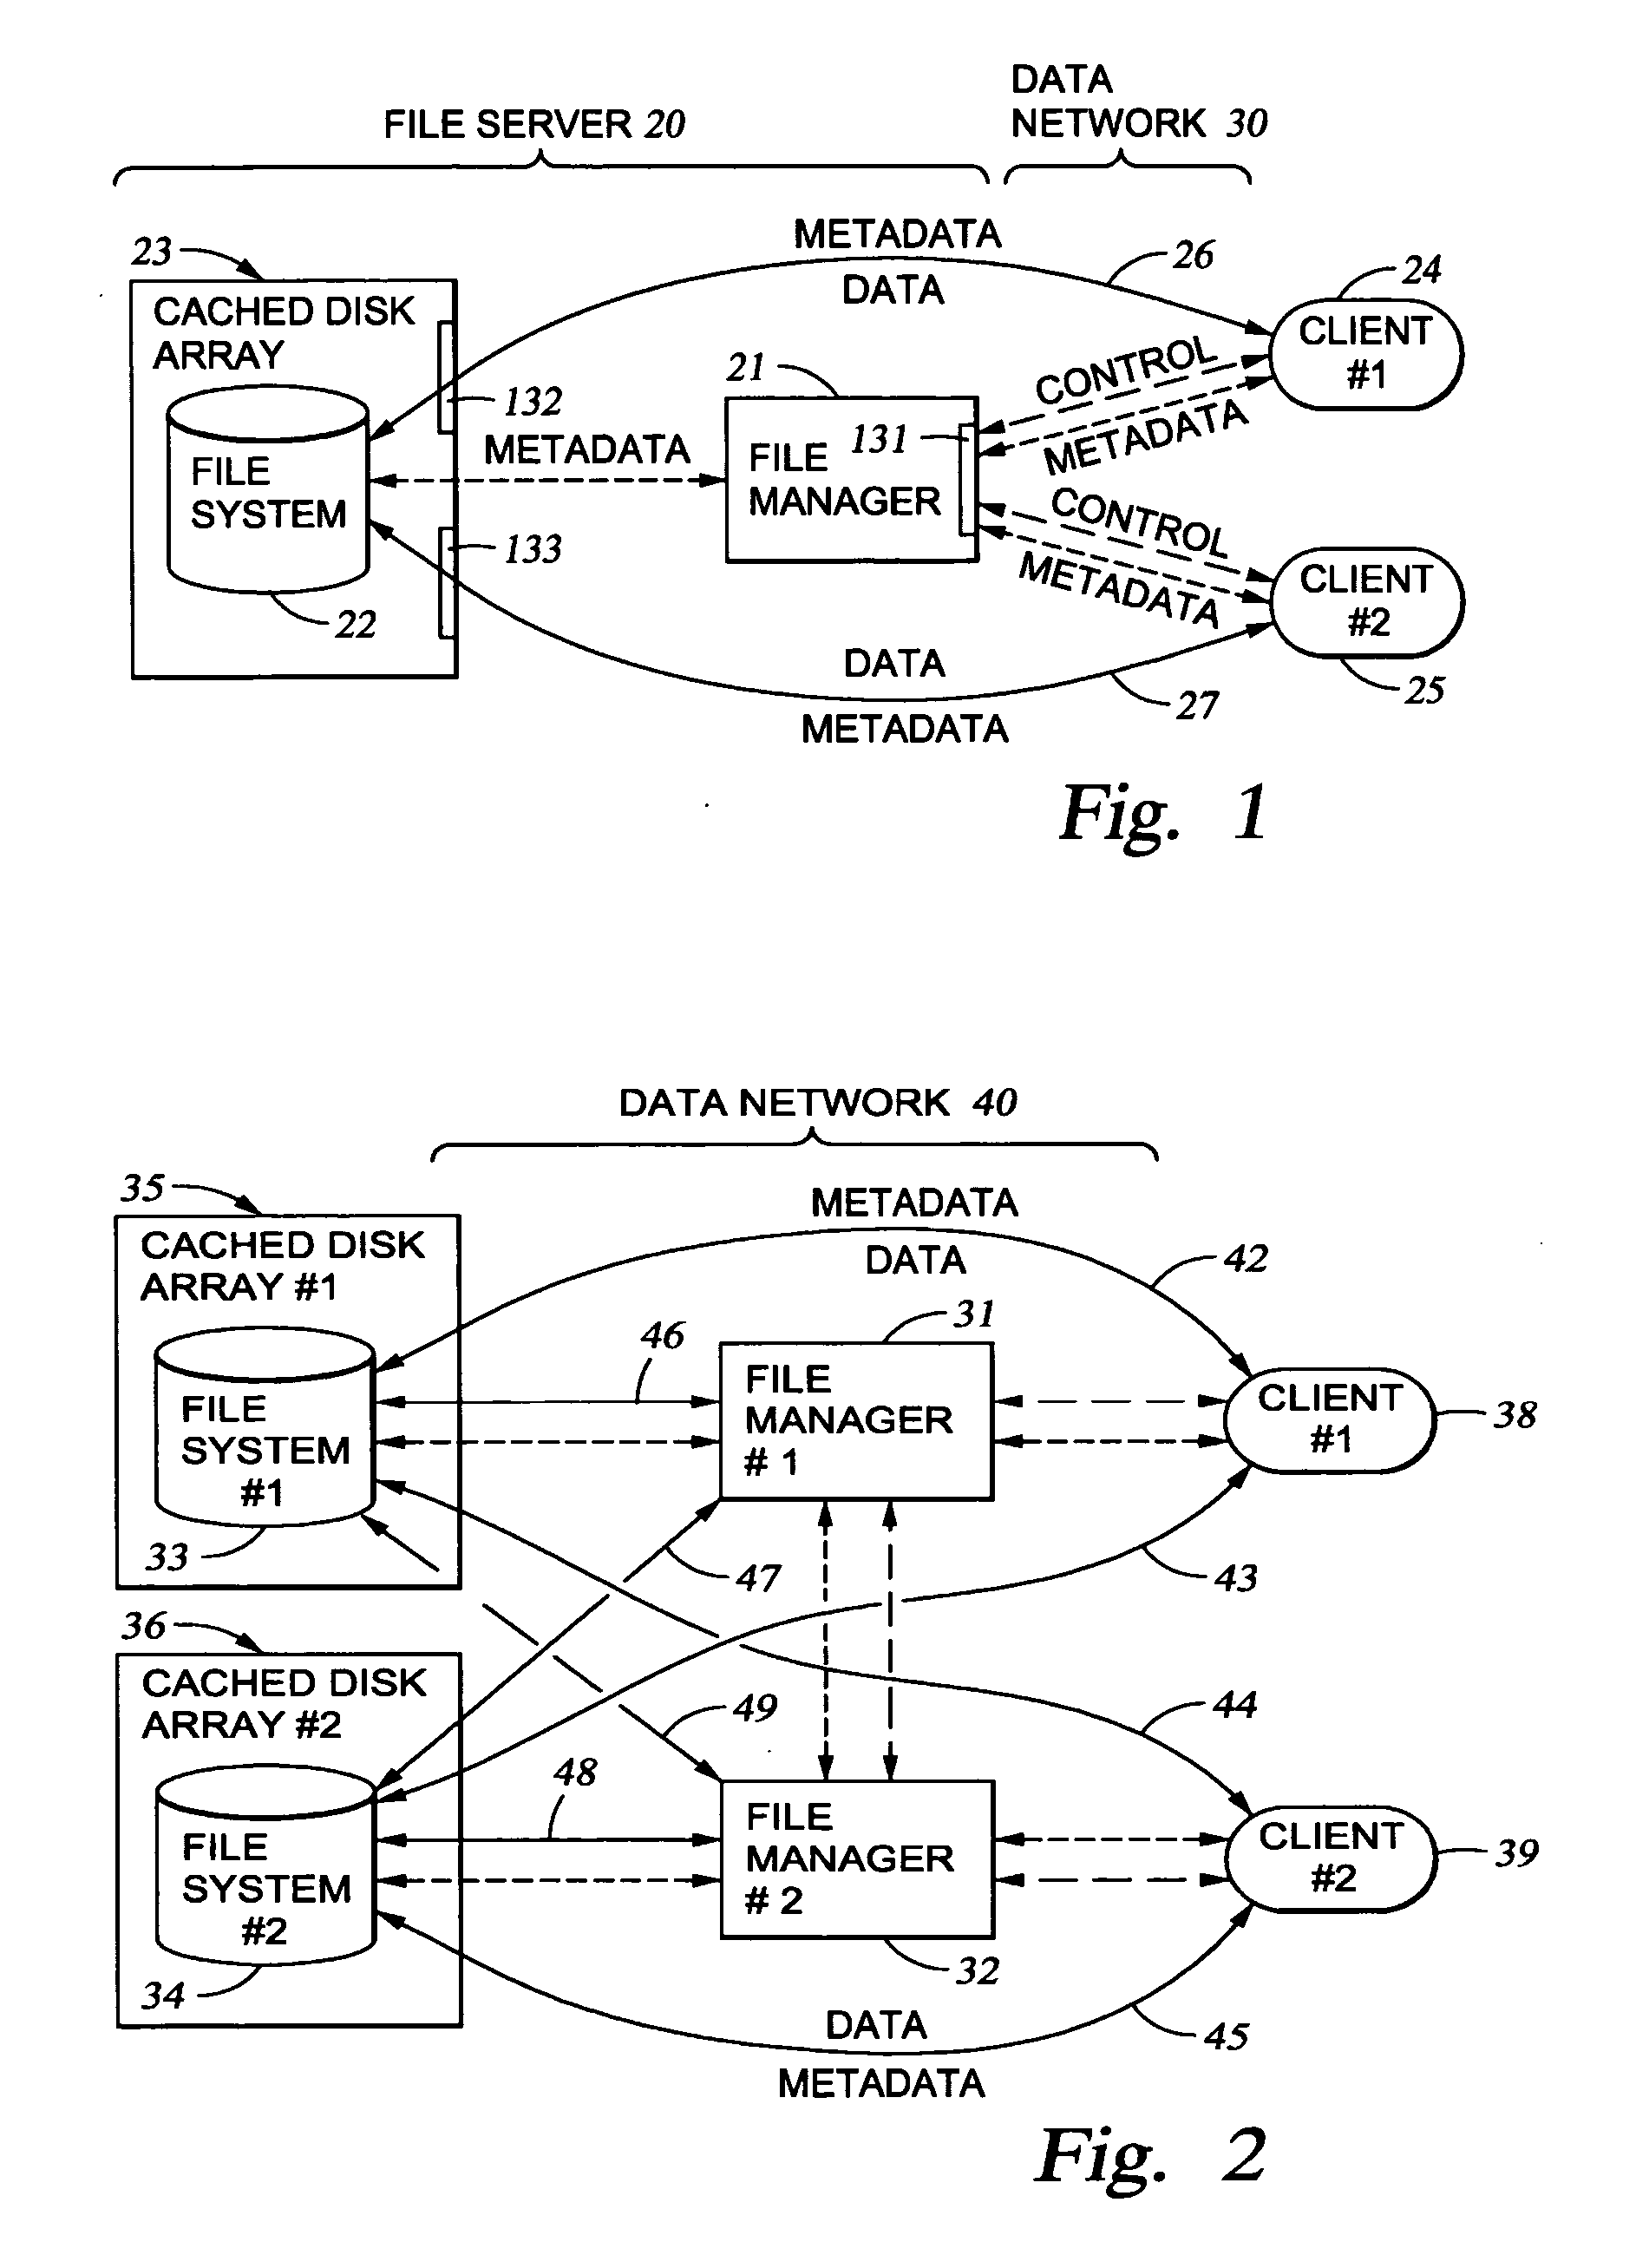 Delegation of metadata management in a storage system by leasing of free file system blocks from a file system owner